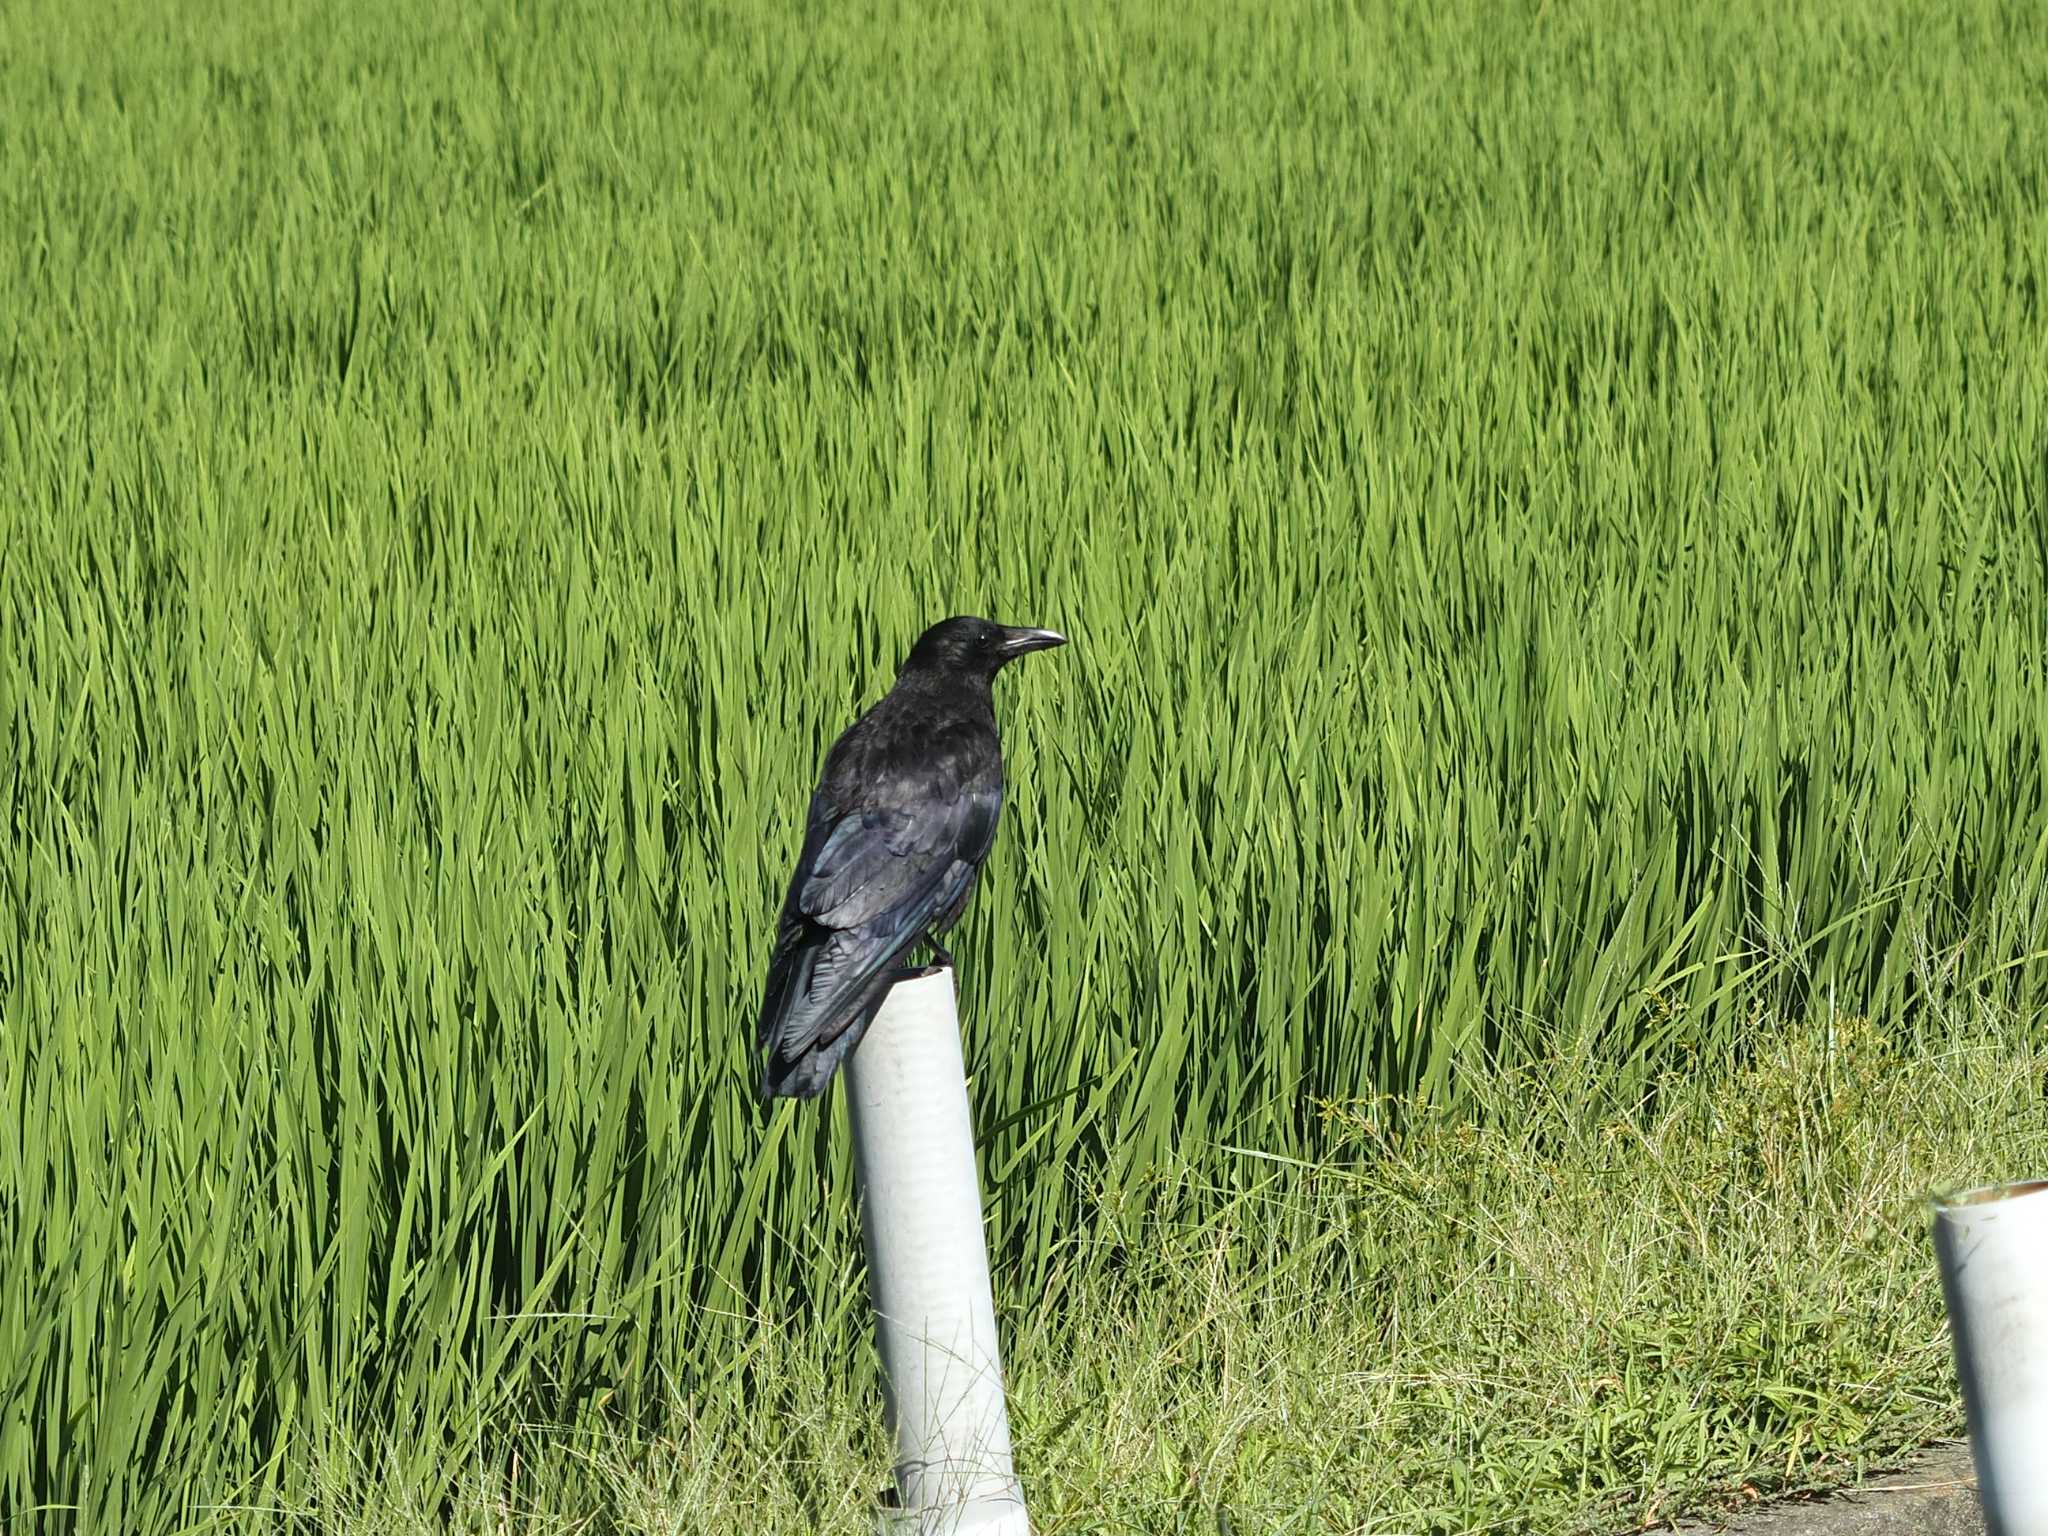 Photo of Carrion Crow at 大垣のひまわり畑 by MaNu猫